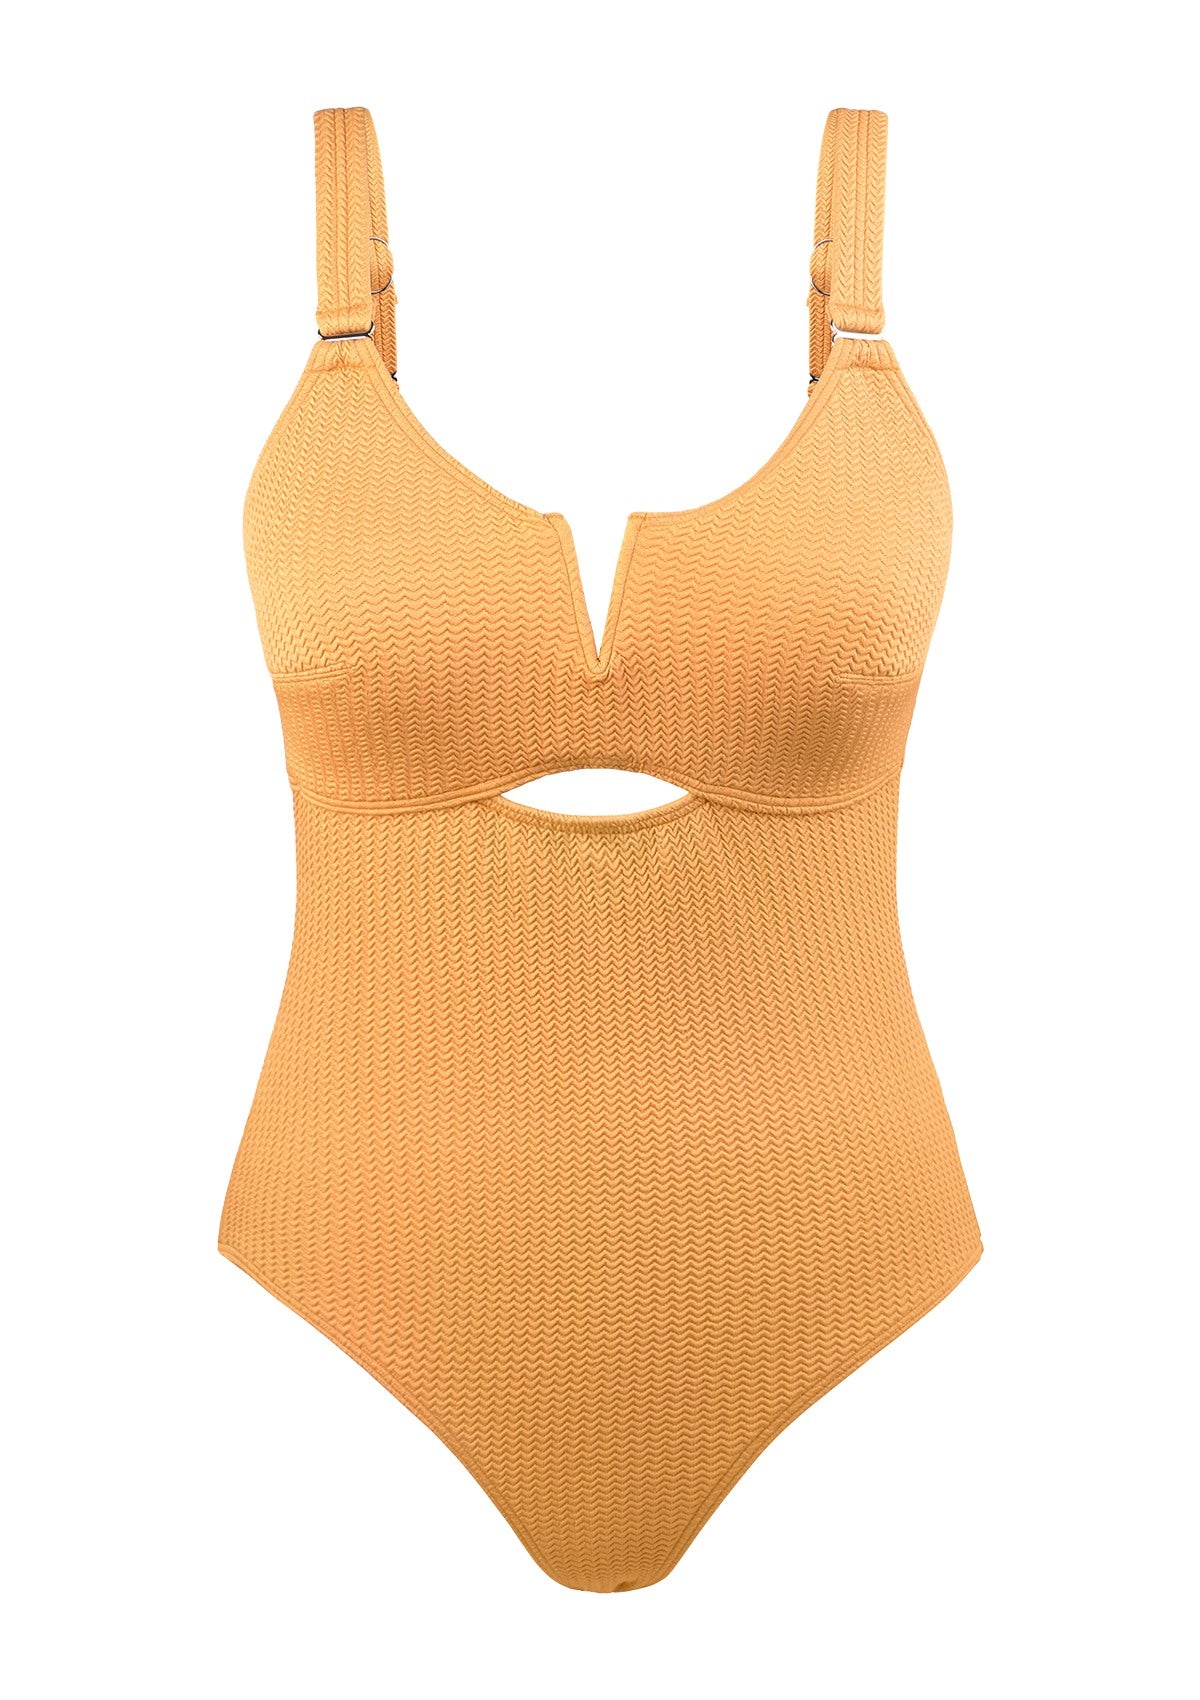 V-wire Plunge Textured One-piece Cutout Swimsuit - XL / Peachy Sunrise